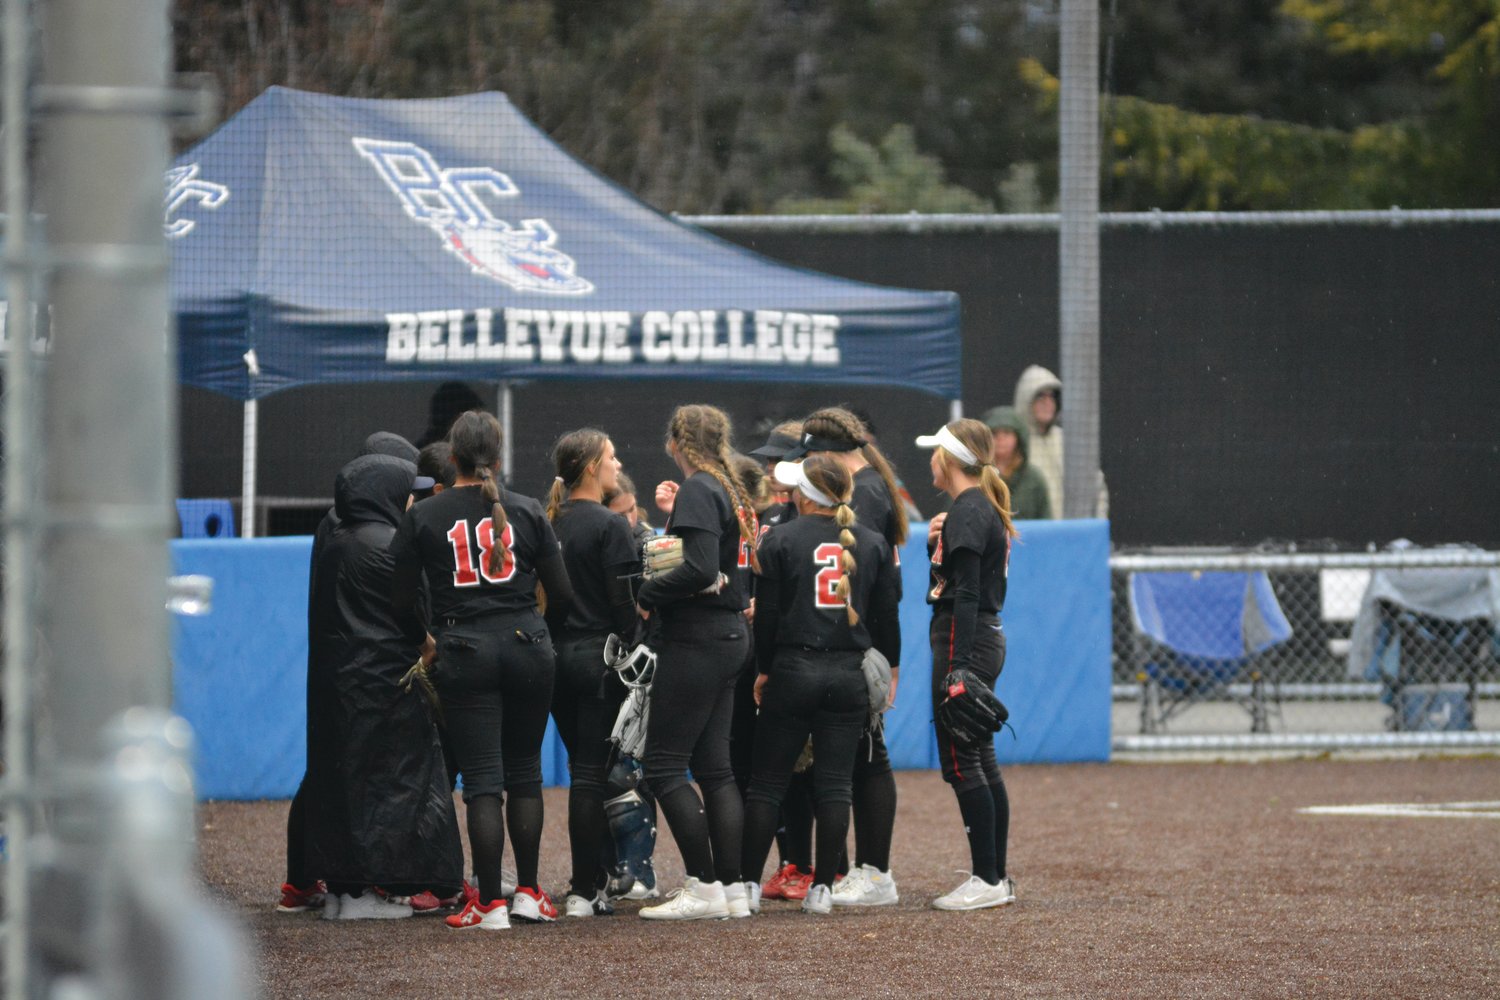 The Yelm High School softball team huddles before taking the field for the second inning during a game against Ellensburg at Bellevue College on Friday, March 24.